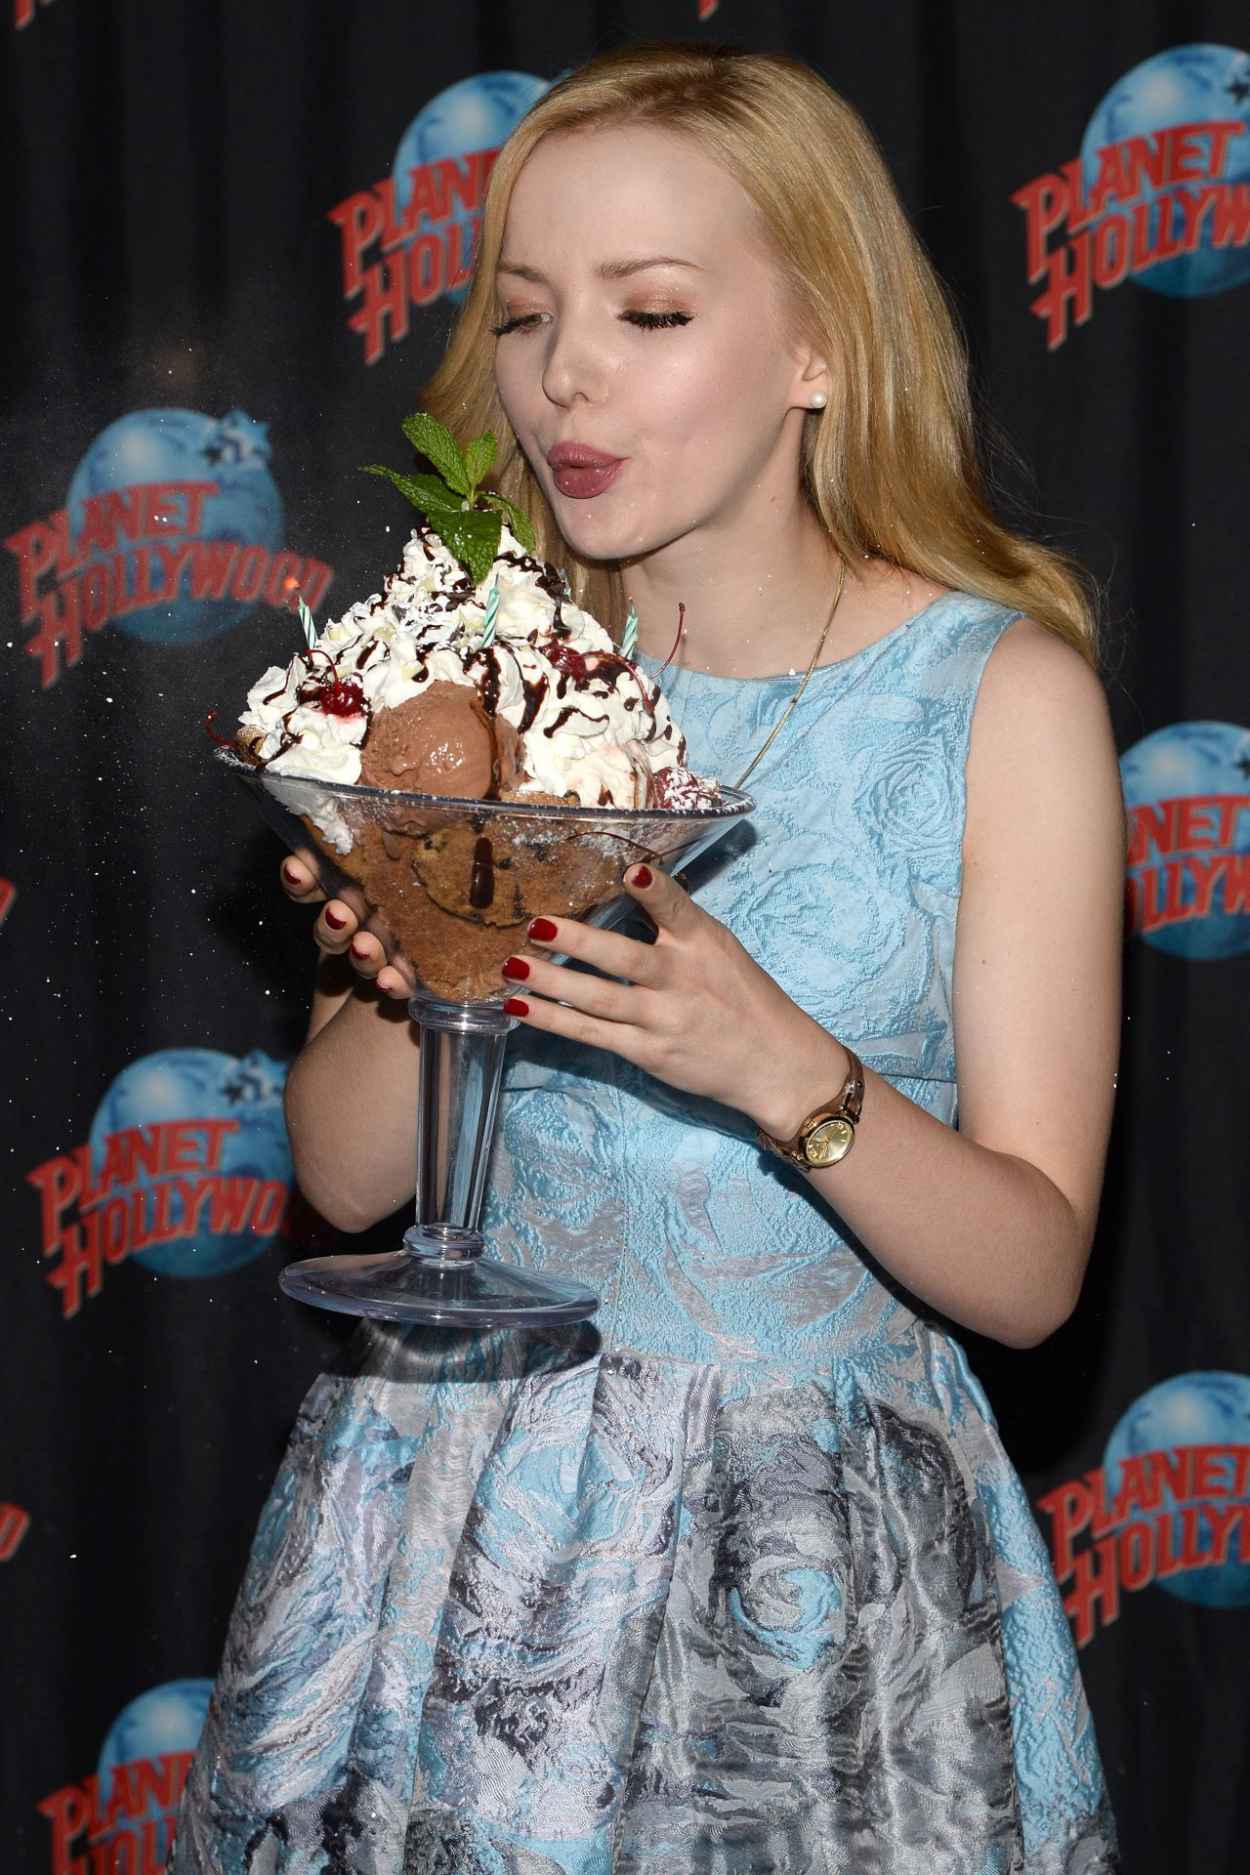 Dove Cameron at Planet Hollywood in Times Square - Eve of Her birthday, January 2015-1